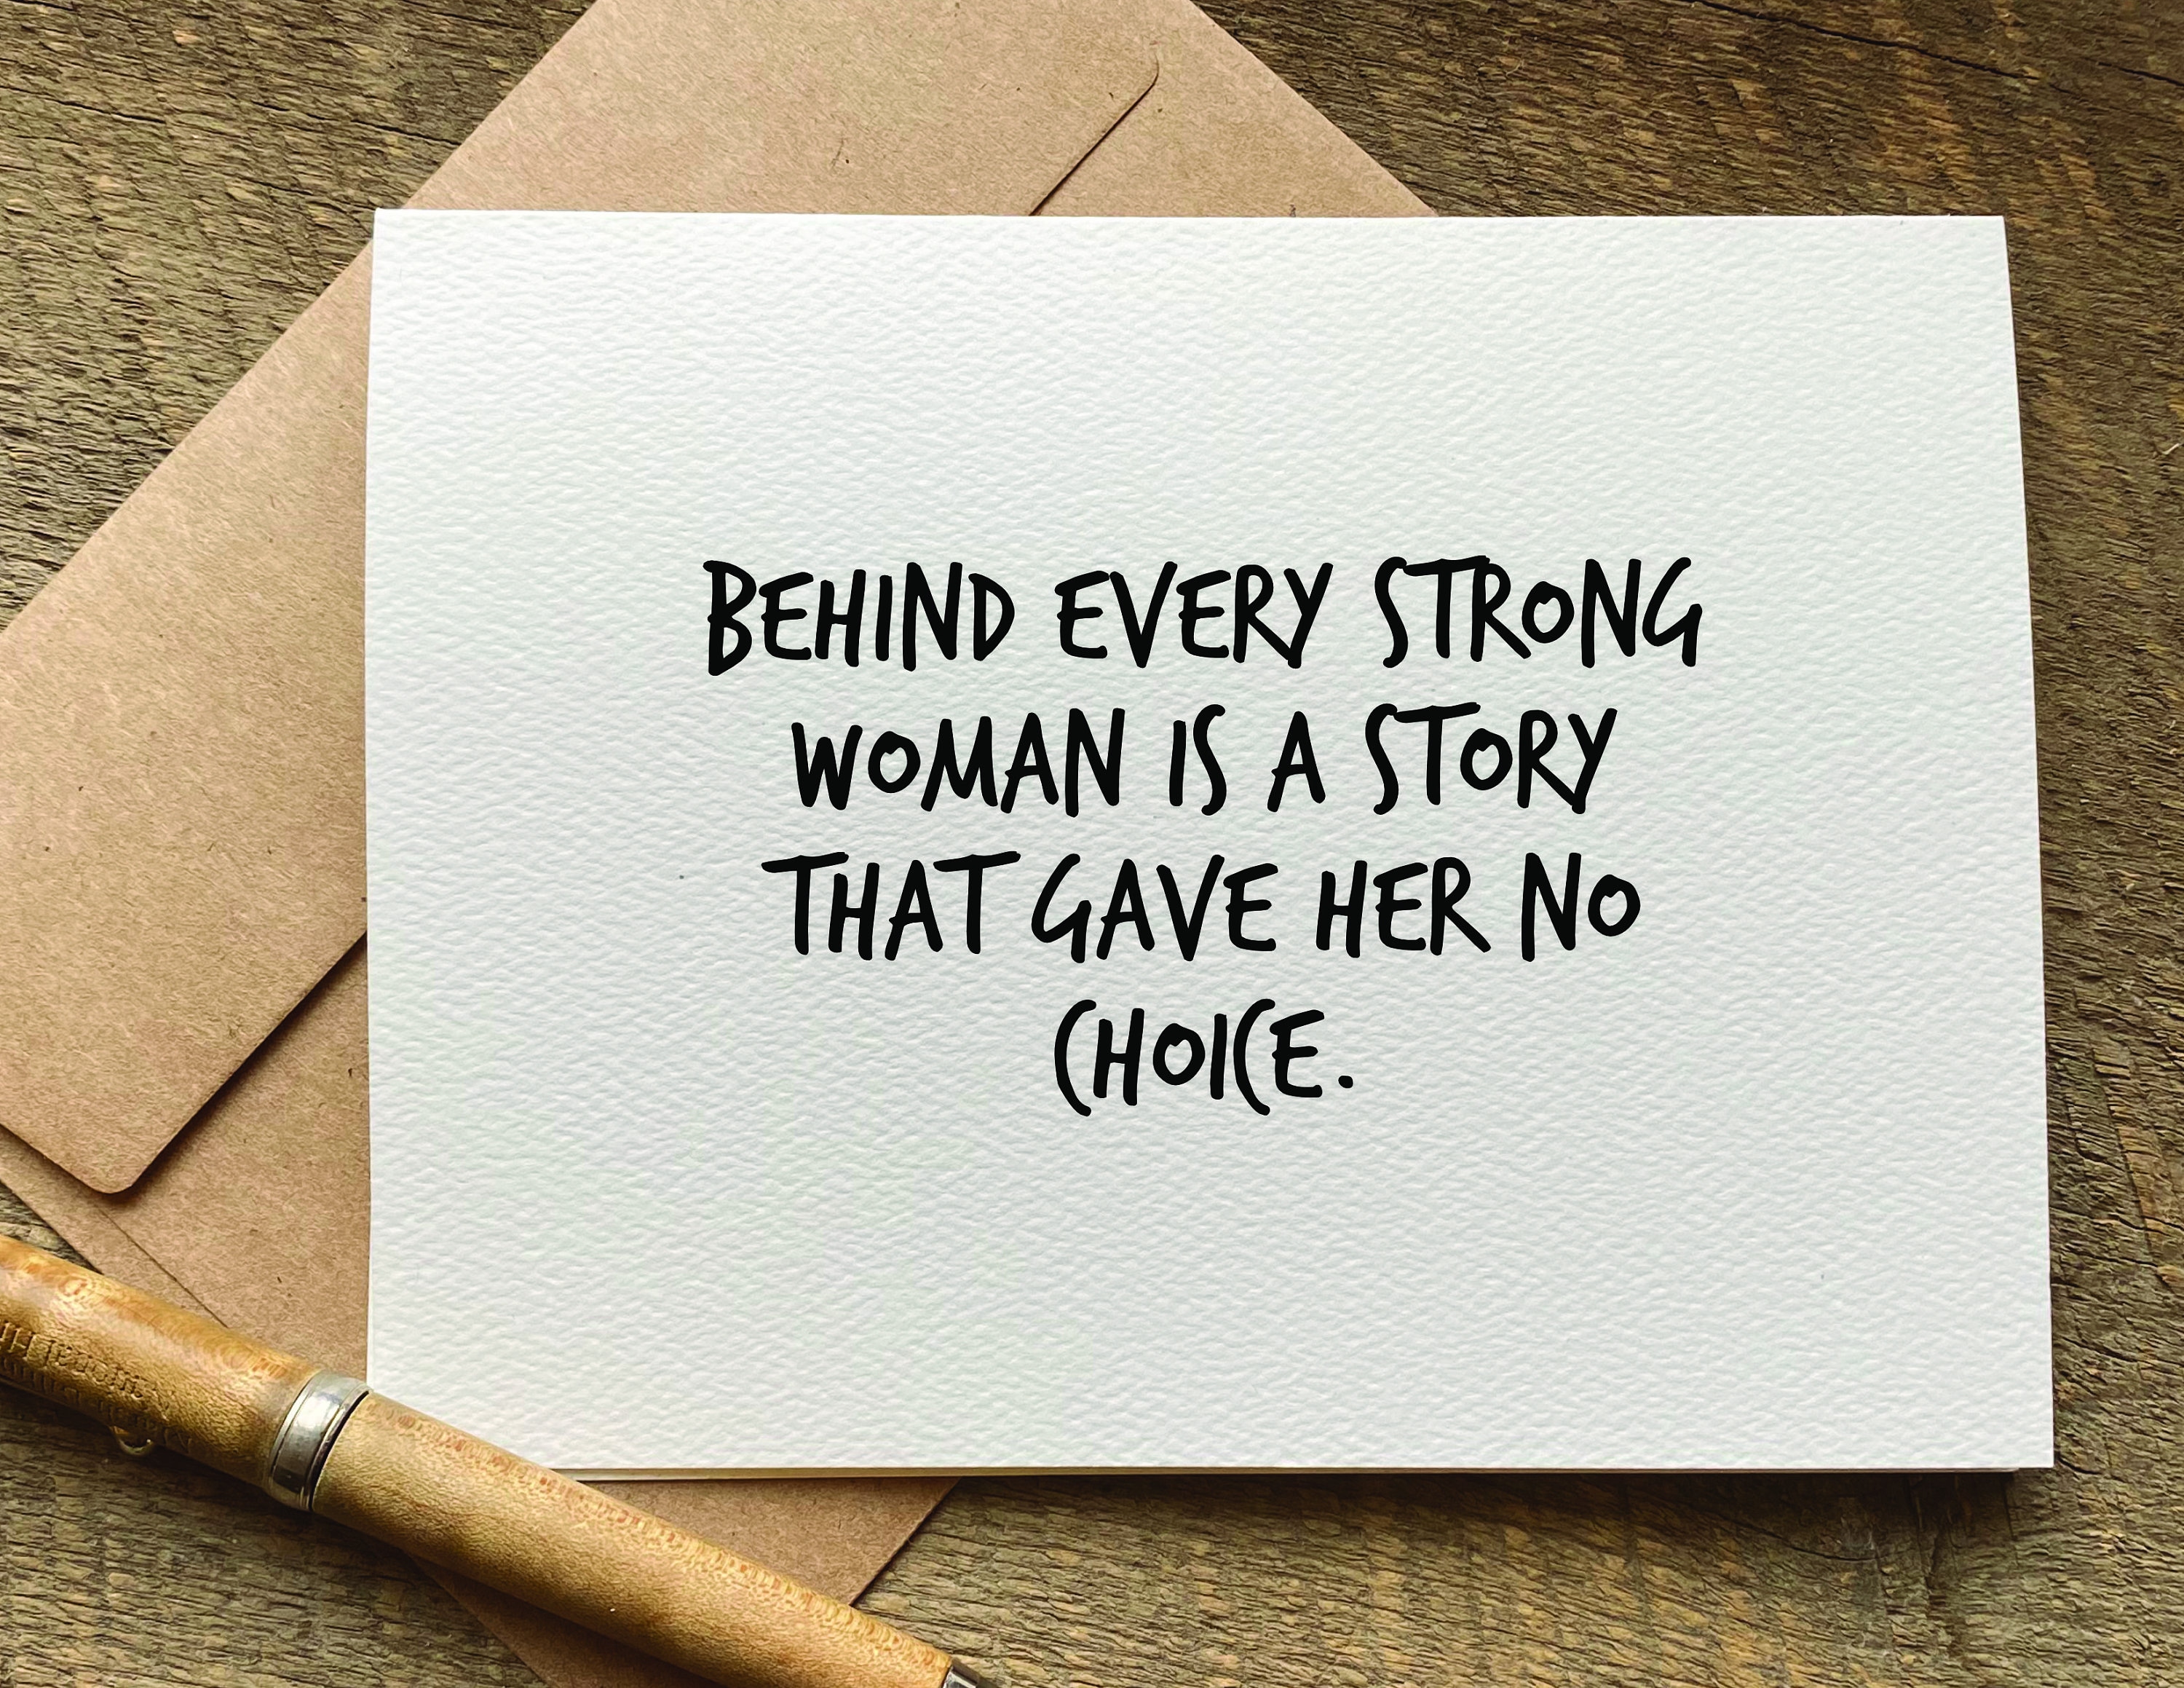 Behind Every Strong Woman is a Story That Gave Her No Choice